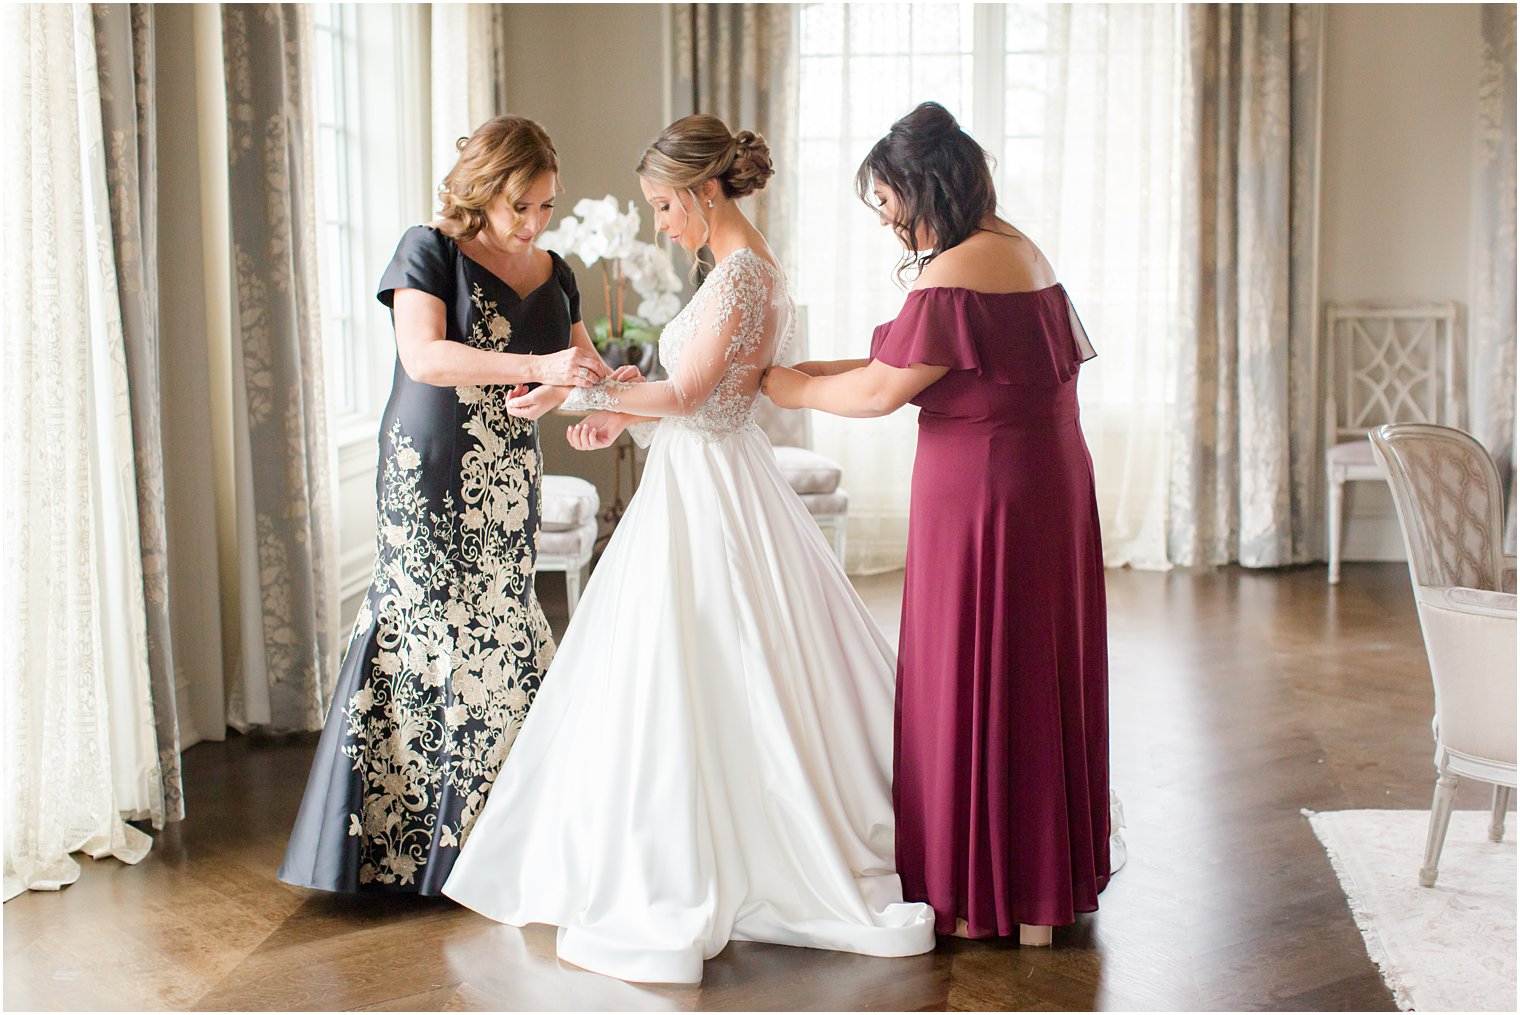 Bride getting ready with her mother and maid of honor